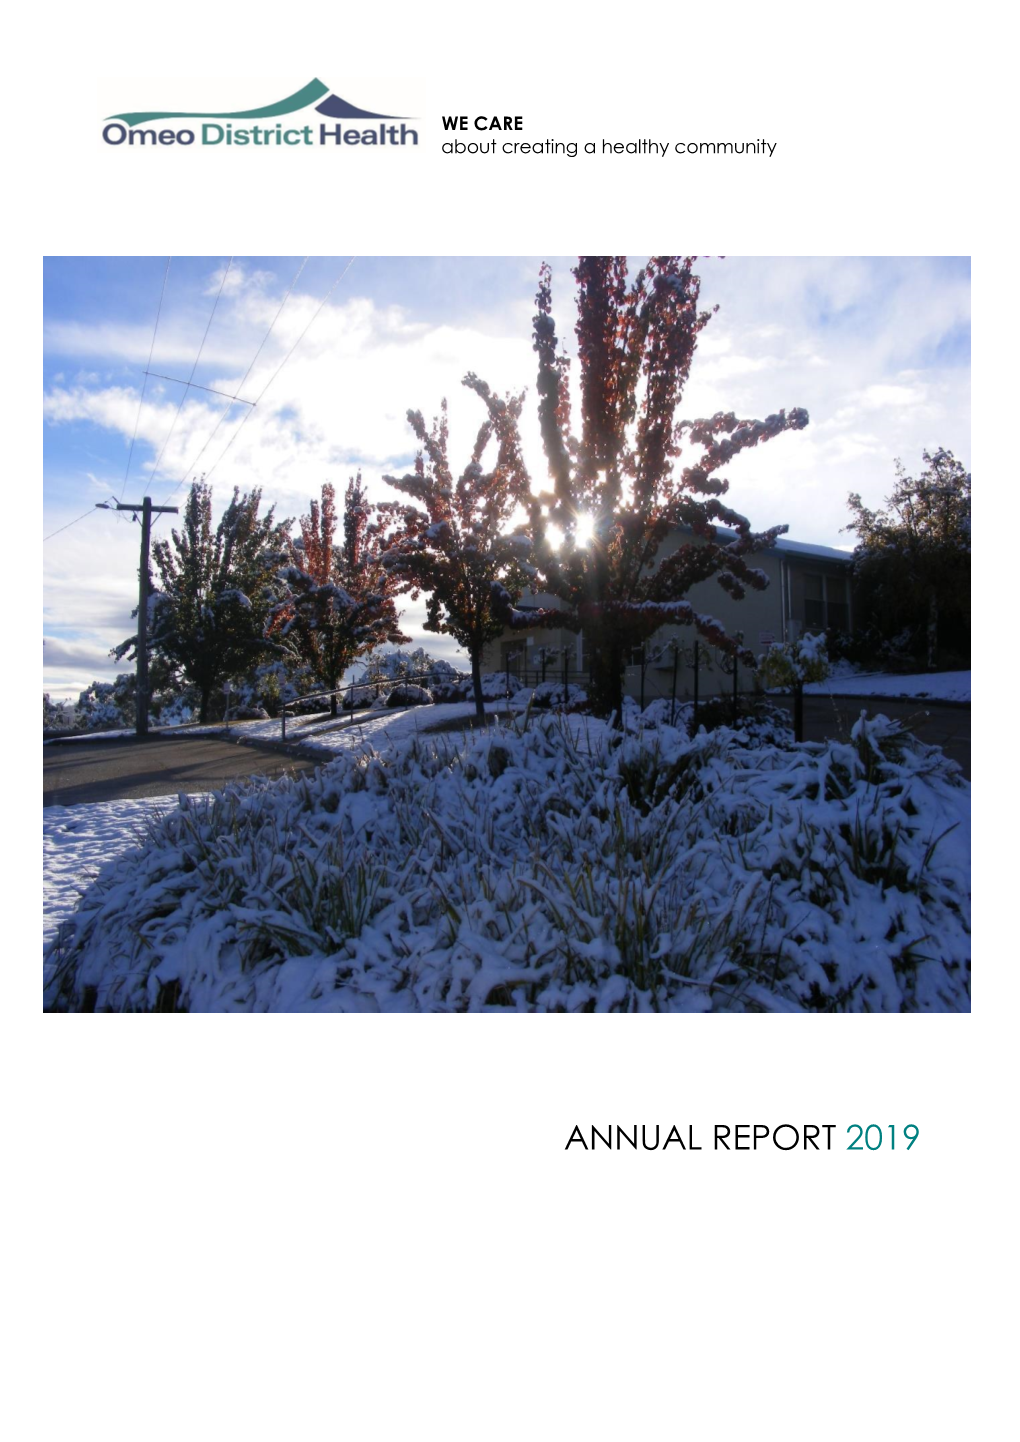 ANNUAL REPORT 2019 Our Journey